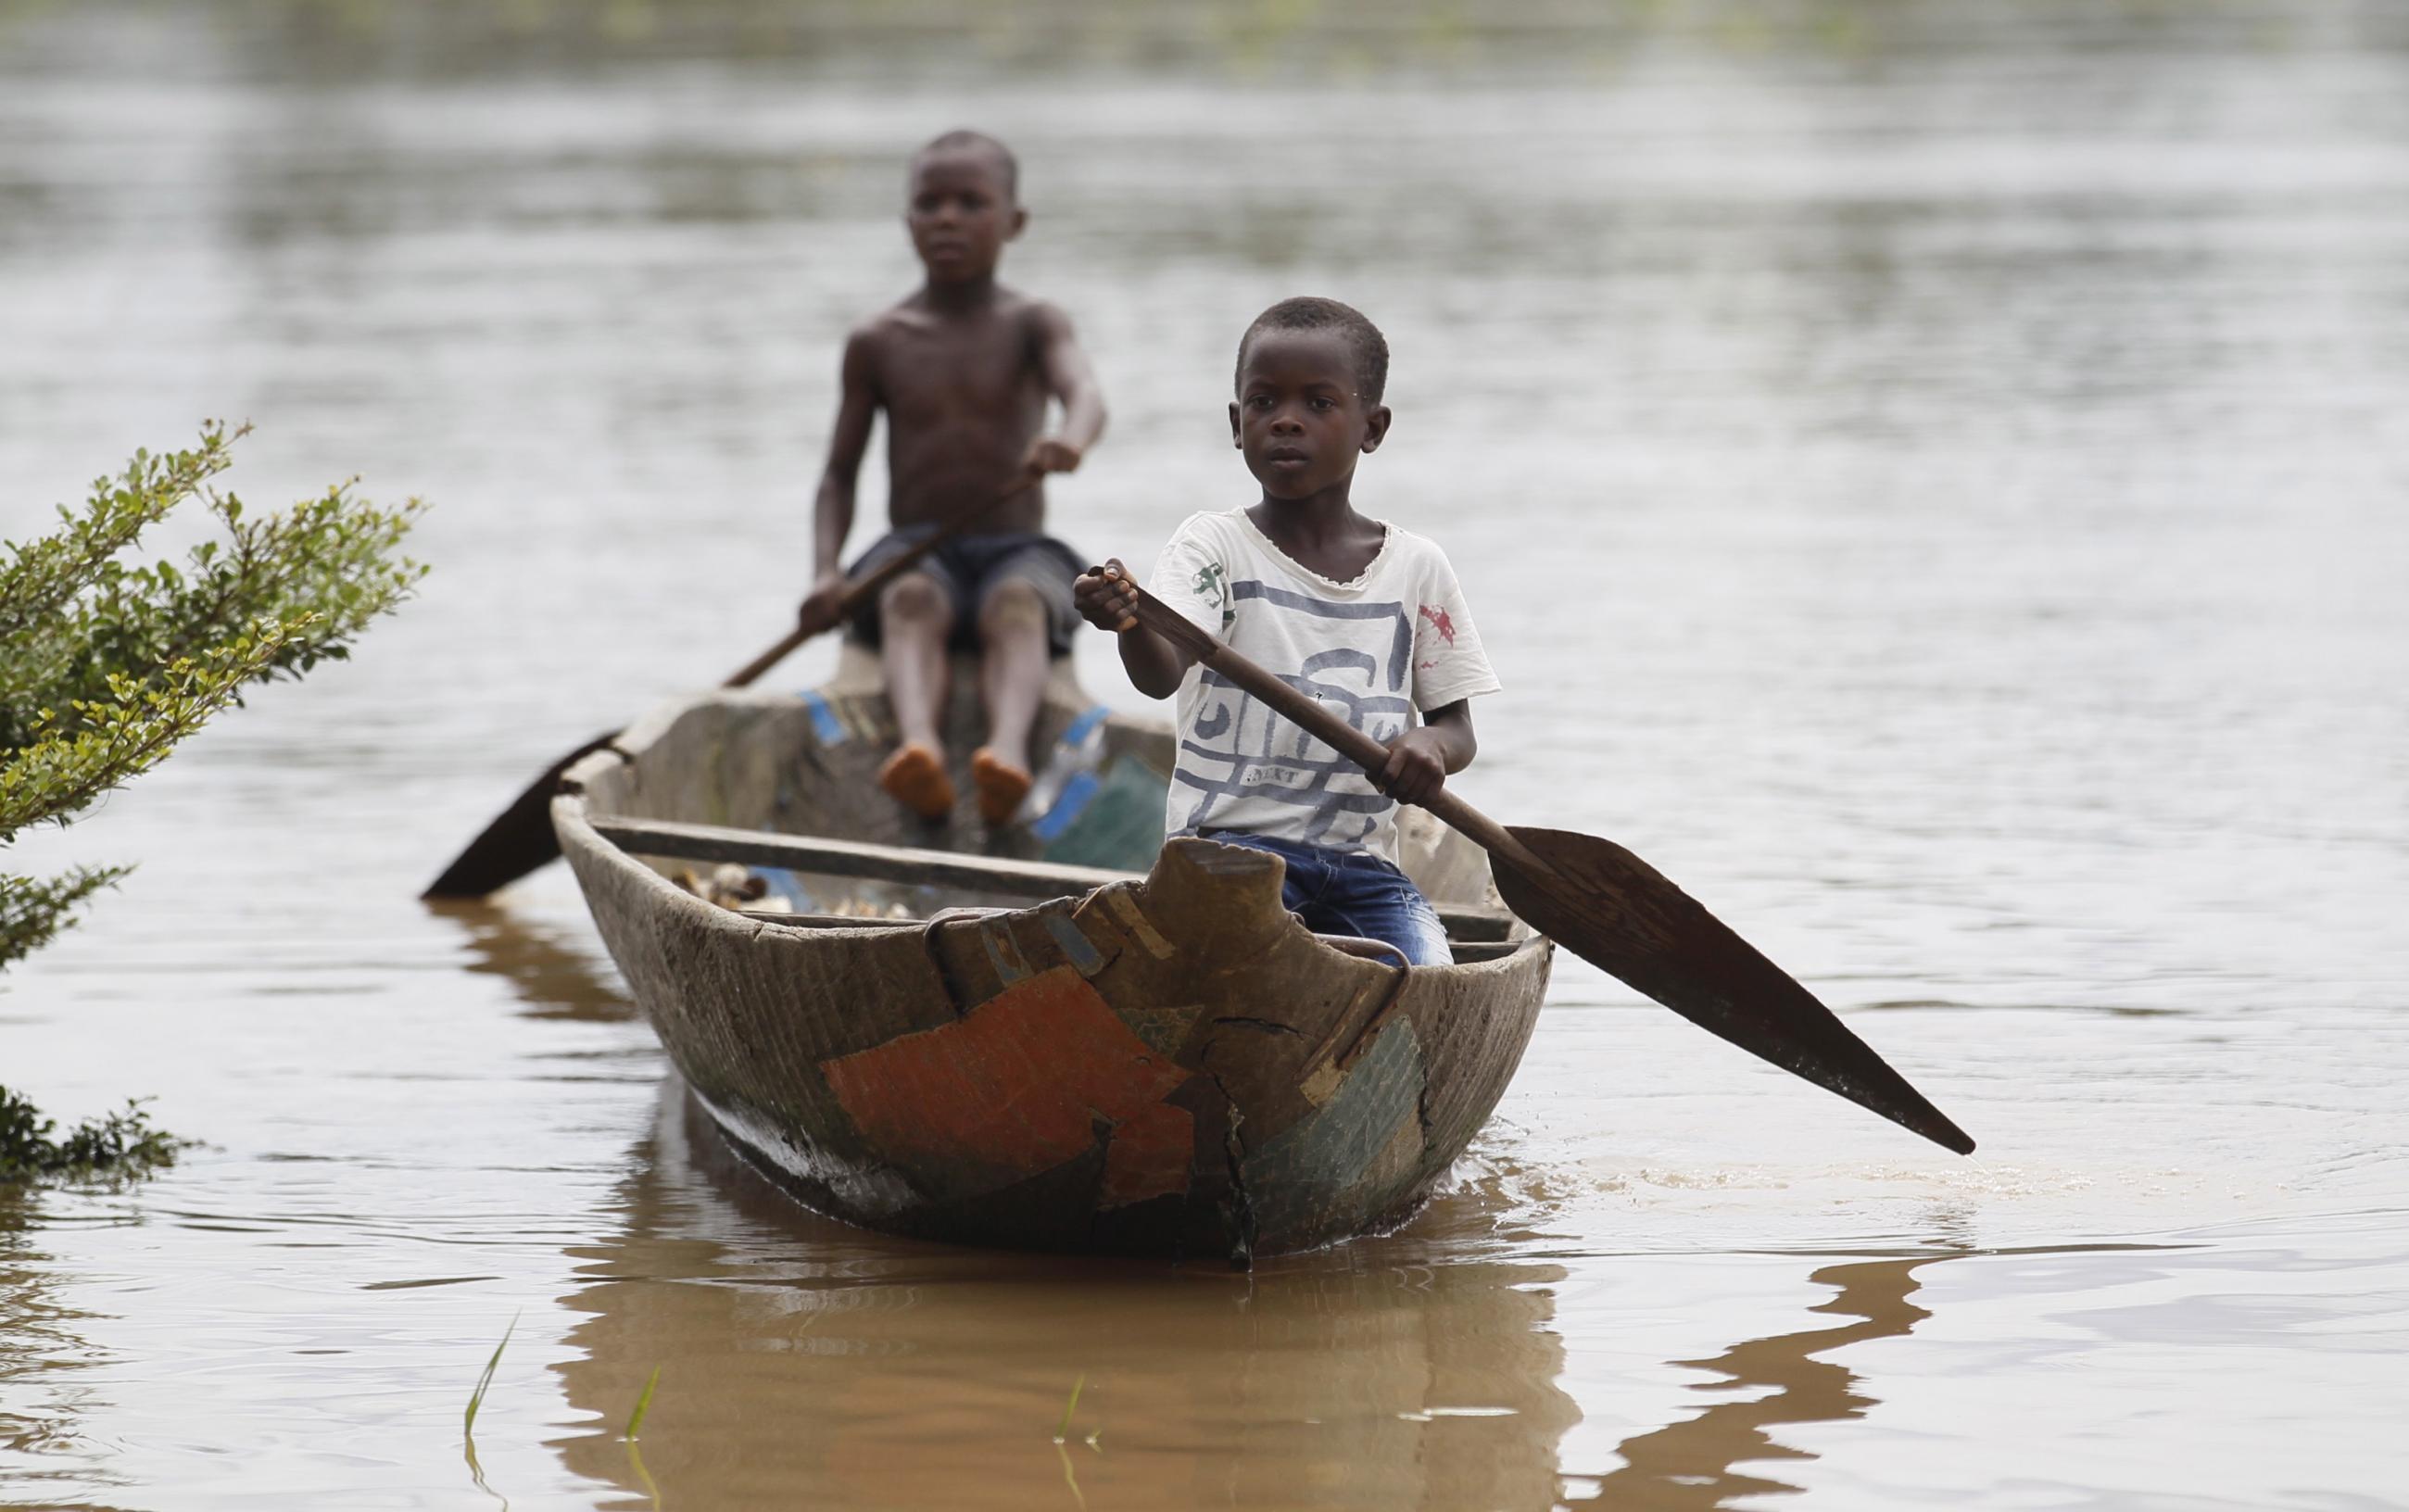 Two young boys paddle a canoe near the shore of the Nun River in Yeneka village in Nigeria's Bayelsa state on October 8, 2015.